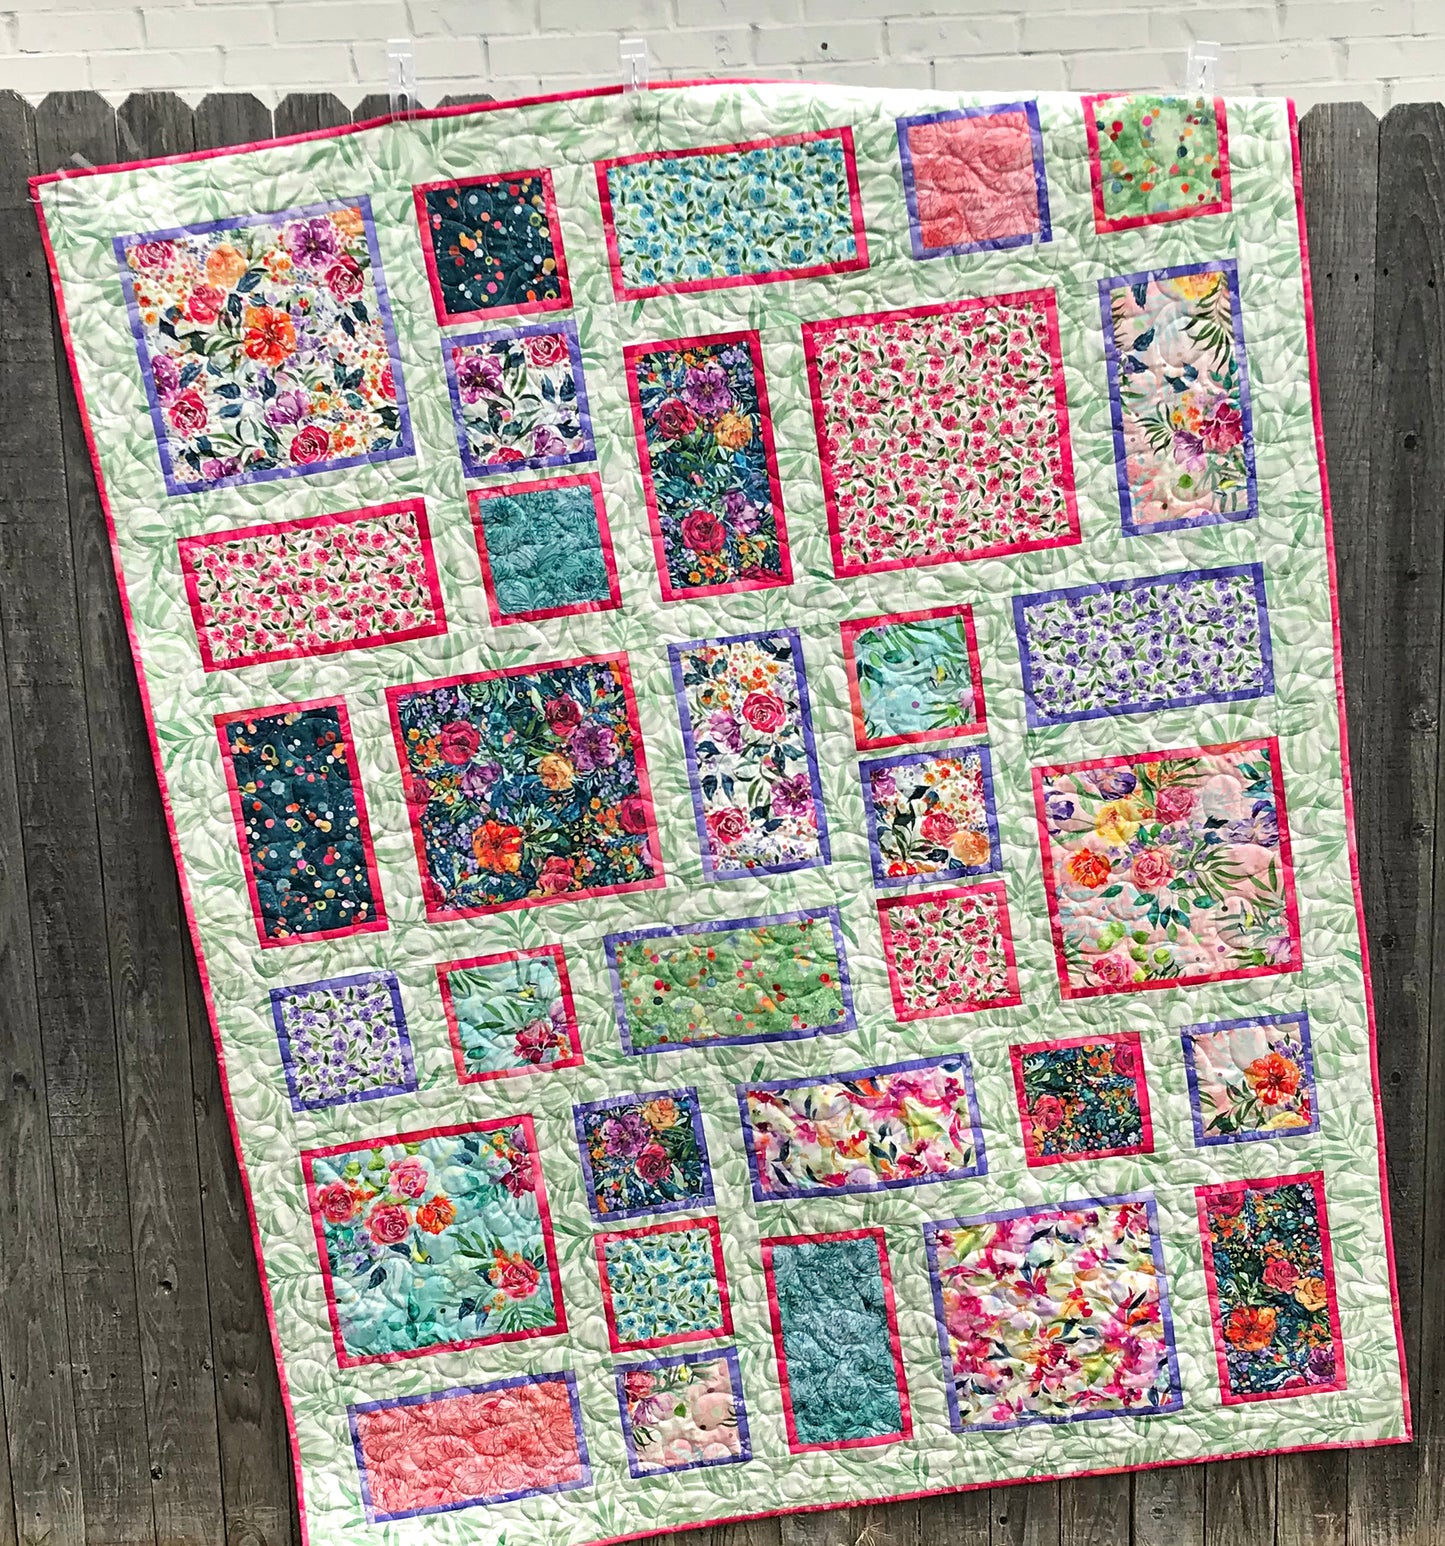 Fancy Frames Quilt pattern of watercolor floral squares and rectangles framed with pink and purple fabric on a light green background.  Quilt shown hanging on a fence.